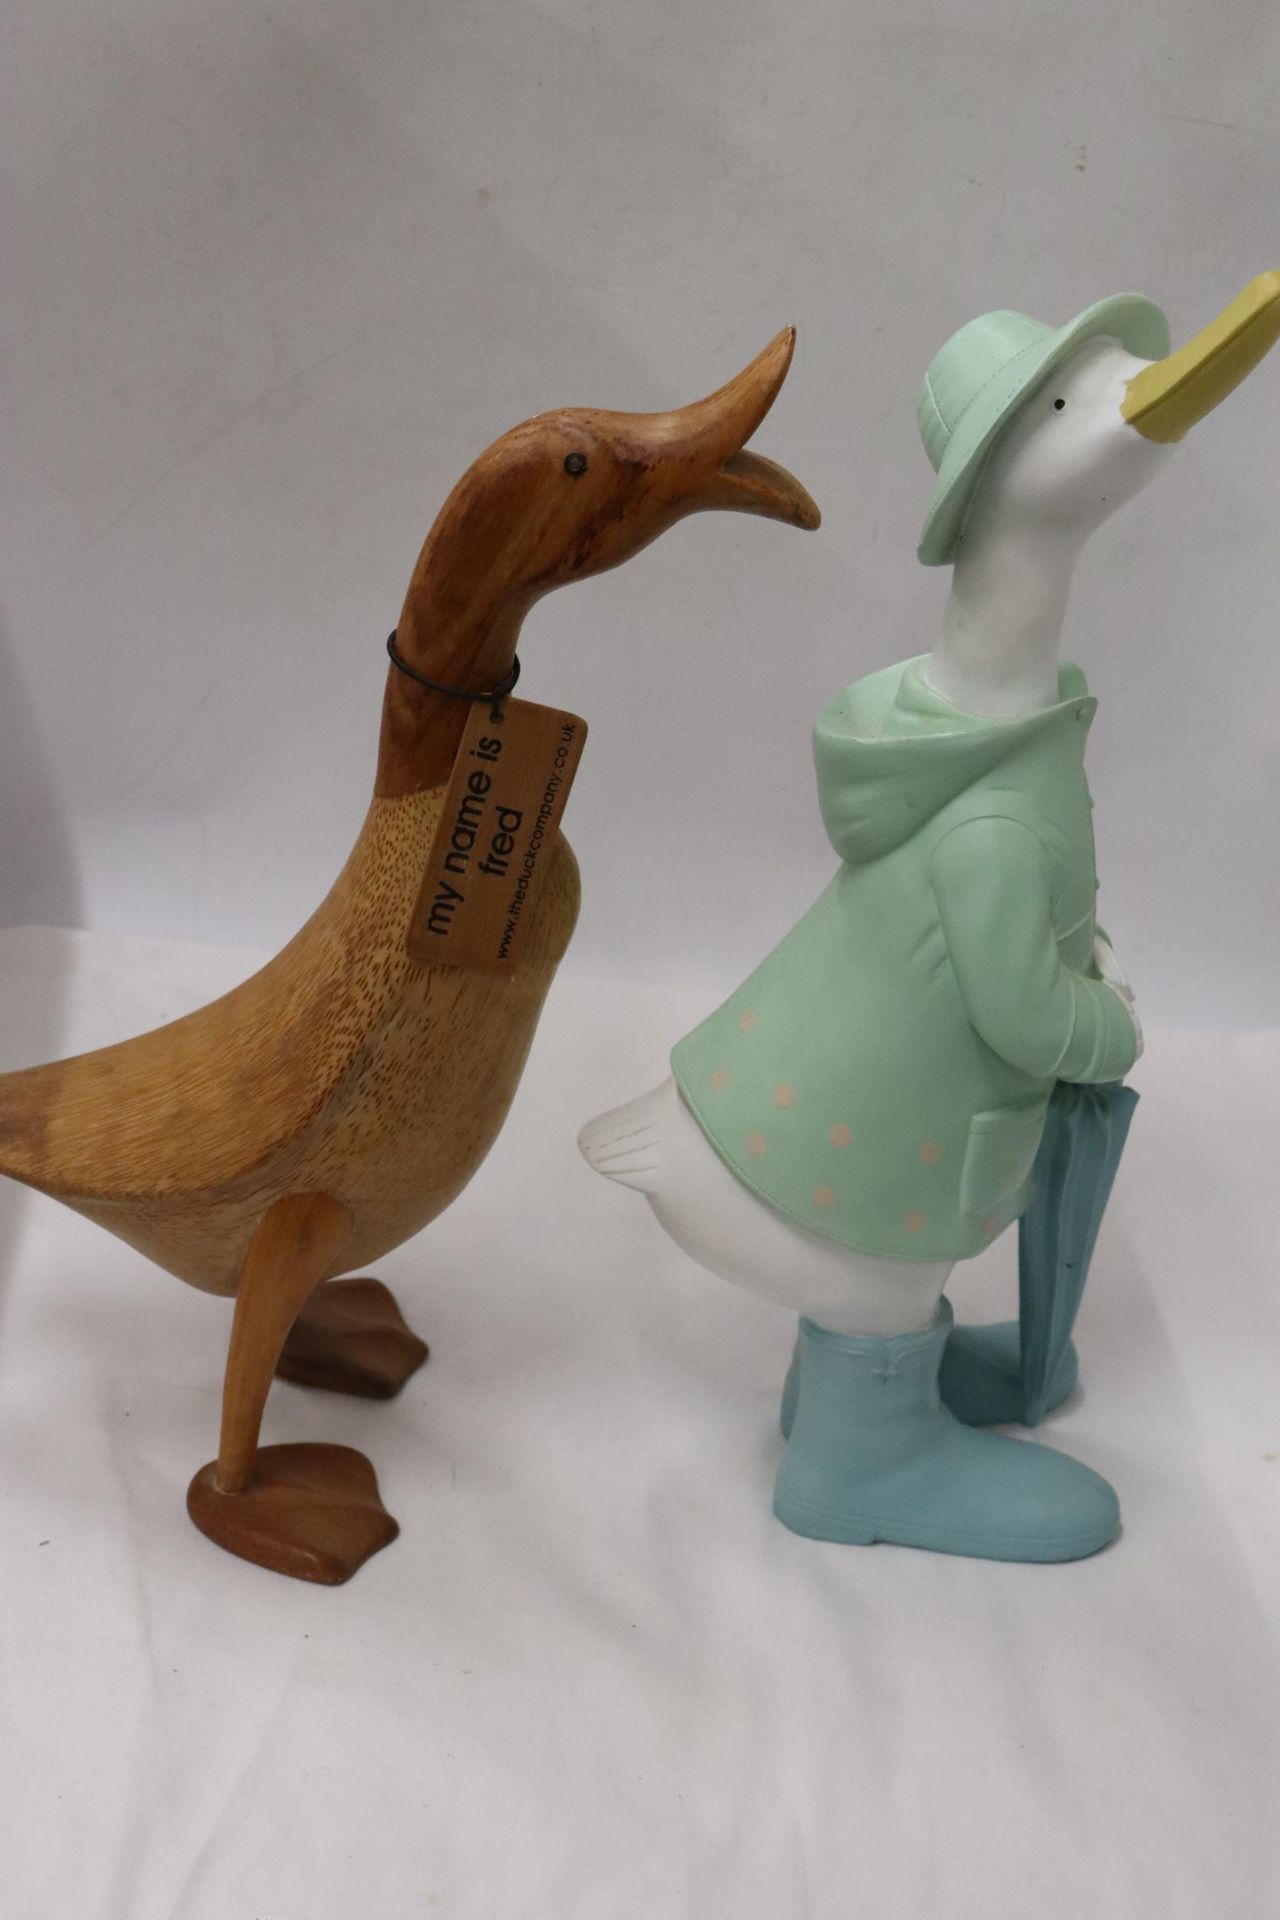 A WOODEN DUCK FROM 'THE DUCK COMPANY' CALLED FRED PLUS A PAINTED DUCK, HEIGHTS 42CM - Bild 2 aus 7